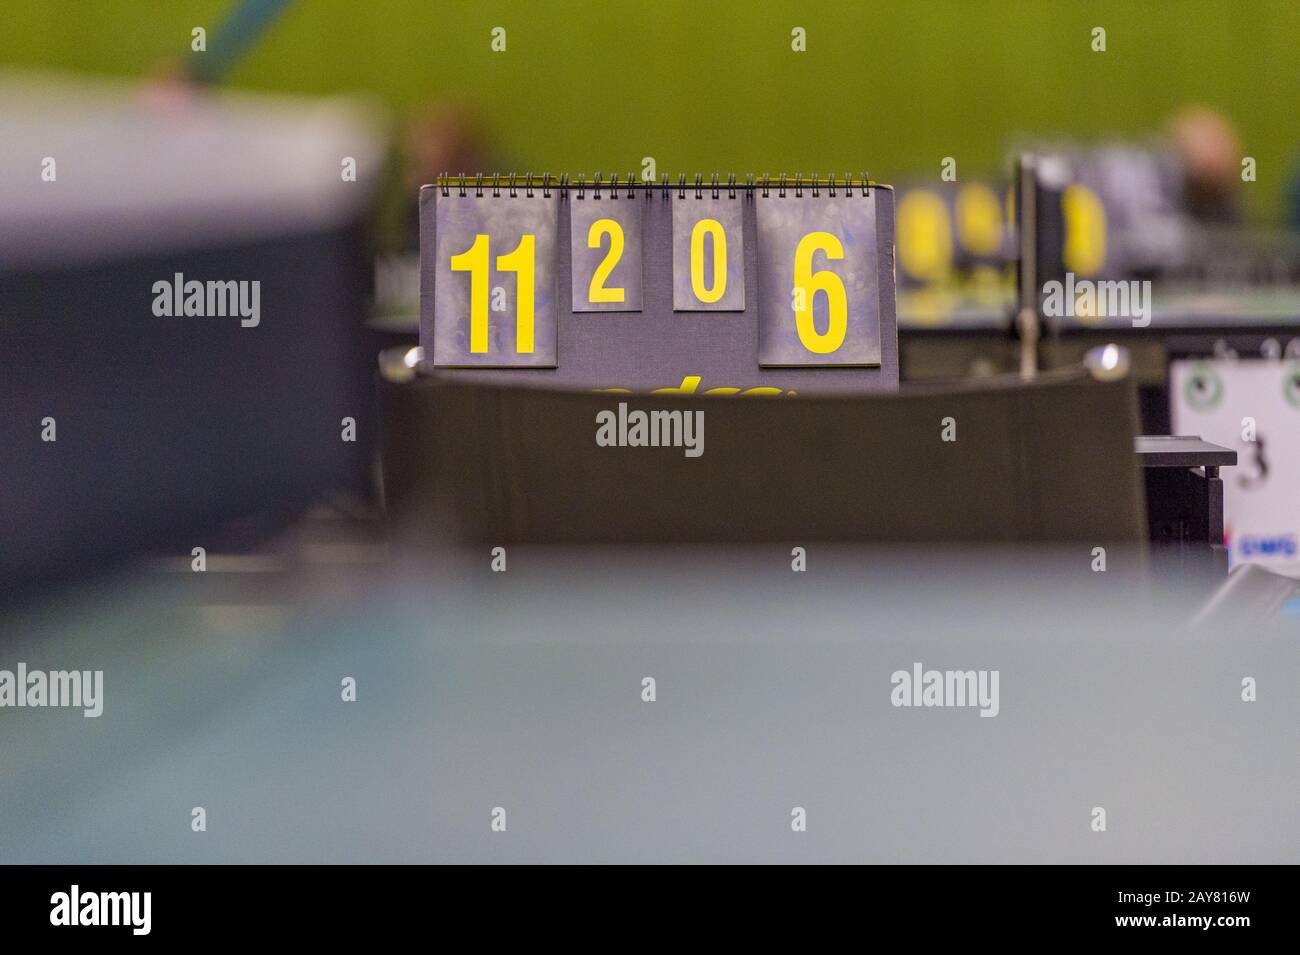 Scoreboard of the score during a table tennis tournament. Stock Photo